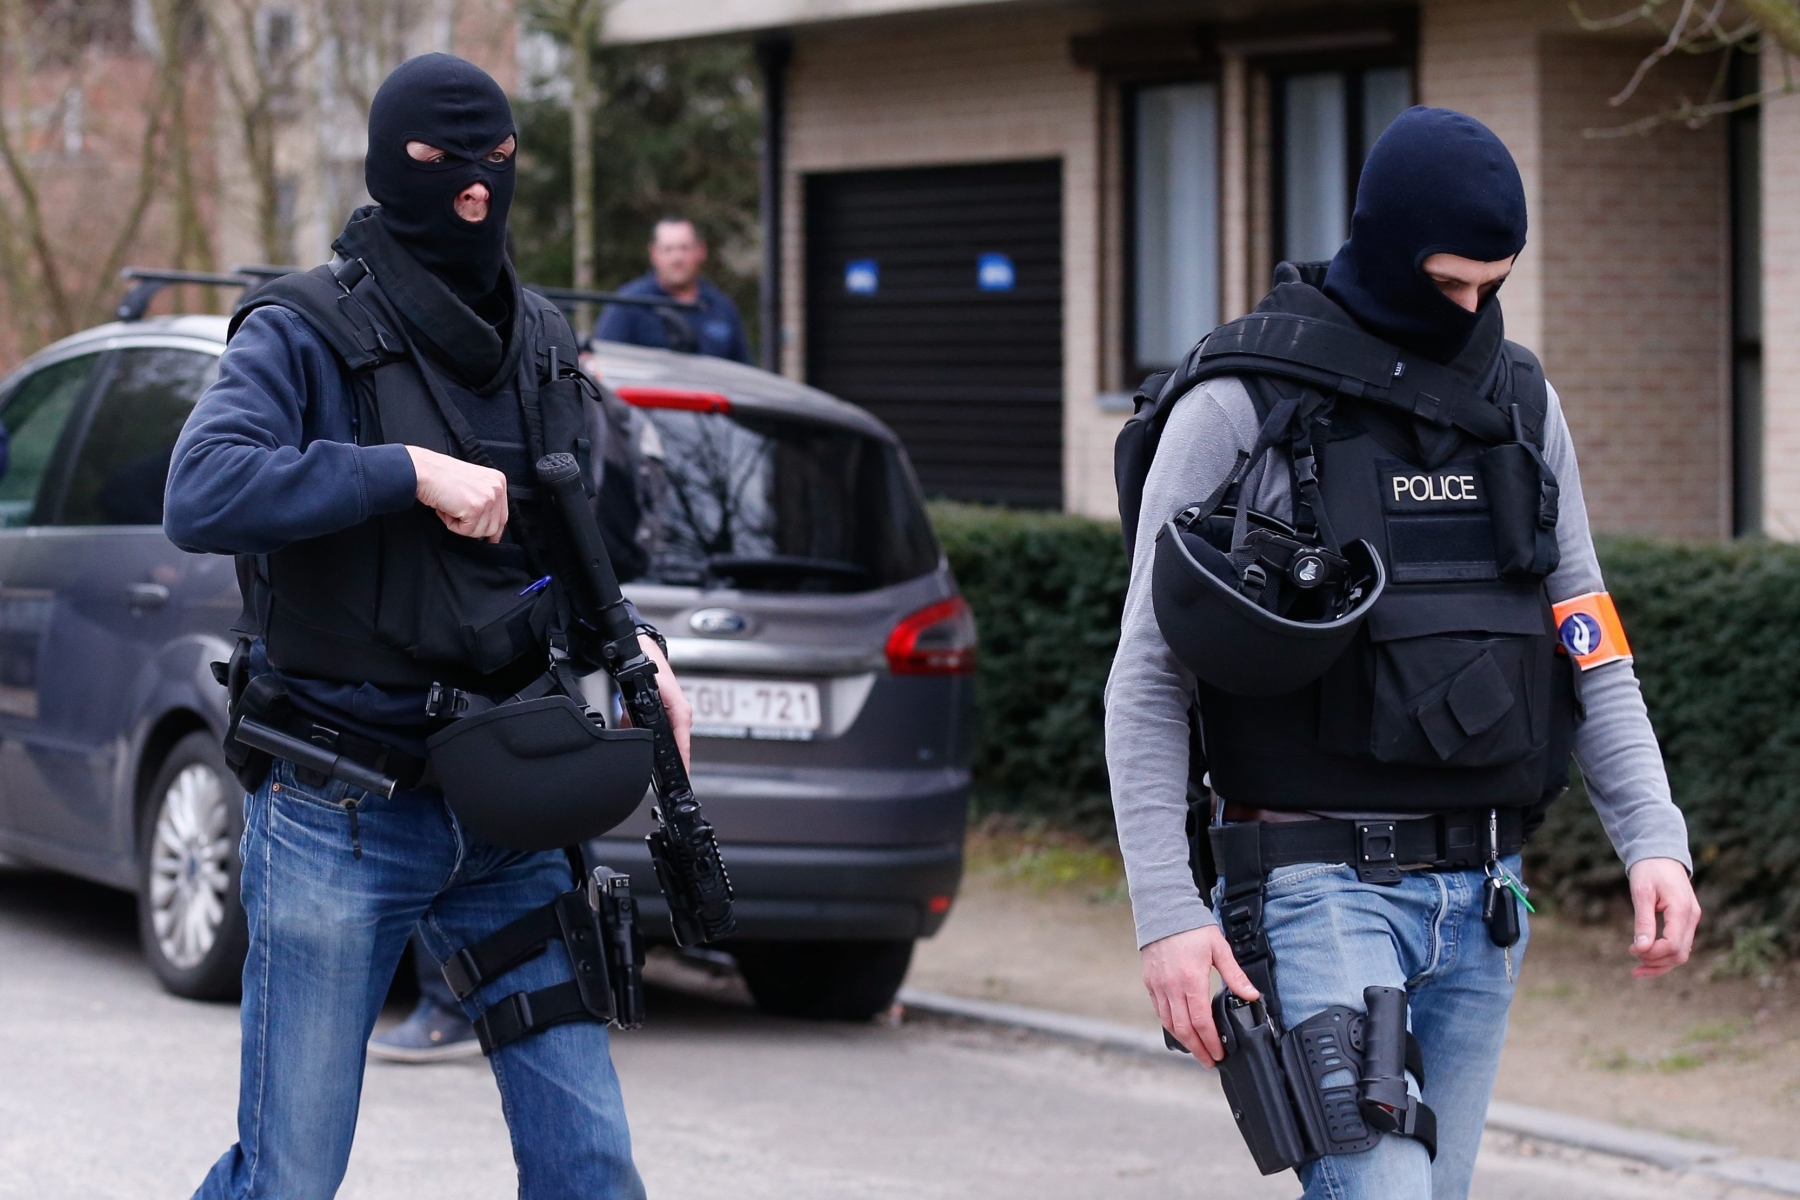 epa05213035 Police officers take position during a police operation in Forest, Brussels, Belgium, 15 March 2016. A major police operation was underway after shots were fired during an anti-terror raid in Brussels. Three officers were lightly injured, police said. The raid was linked to the 13 November Paris Attacks. It was confirmed by the French Interior Minister that French Police were taking part in the operation alongside their Belgian colleagues.  EPA/LAURENT DUBRULE BELGIUM POLICE RAID SHOOTOUT